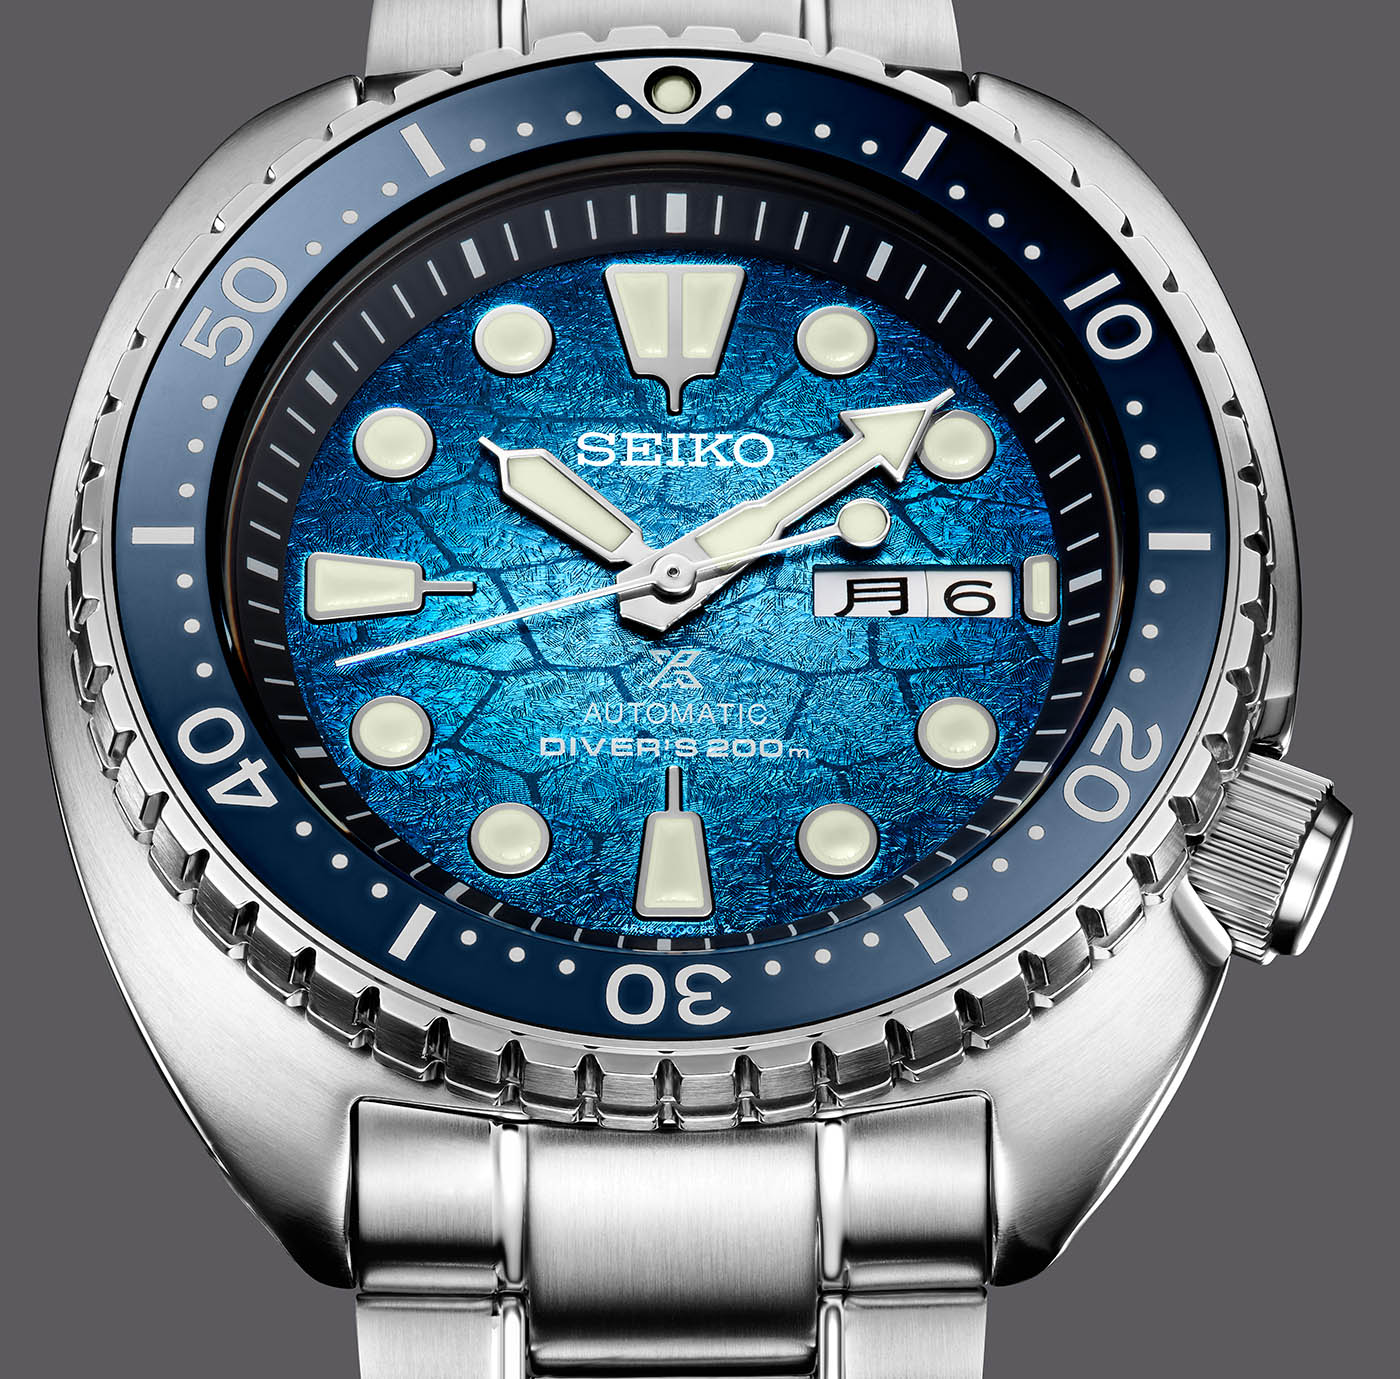 Introducing the Seiko Prospex 'Great Blue' PADI Watches